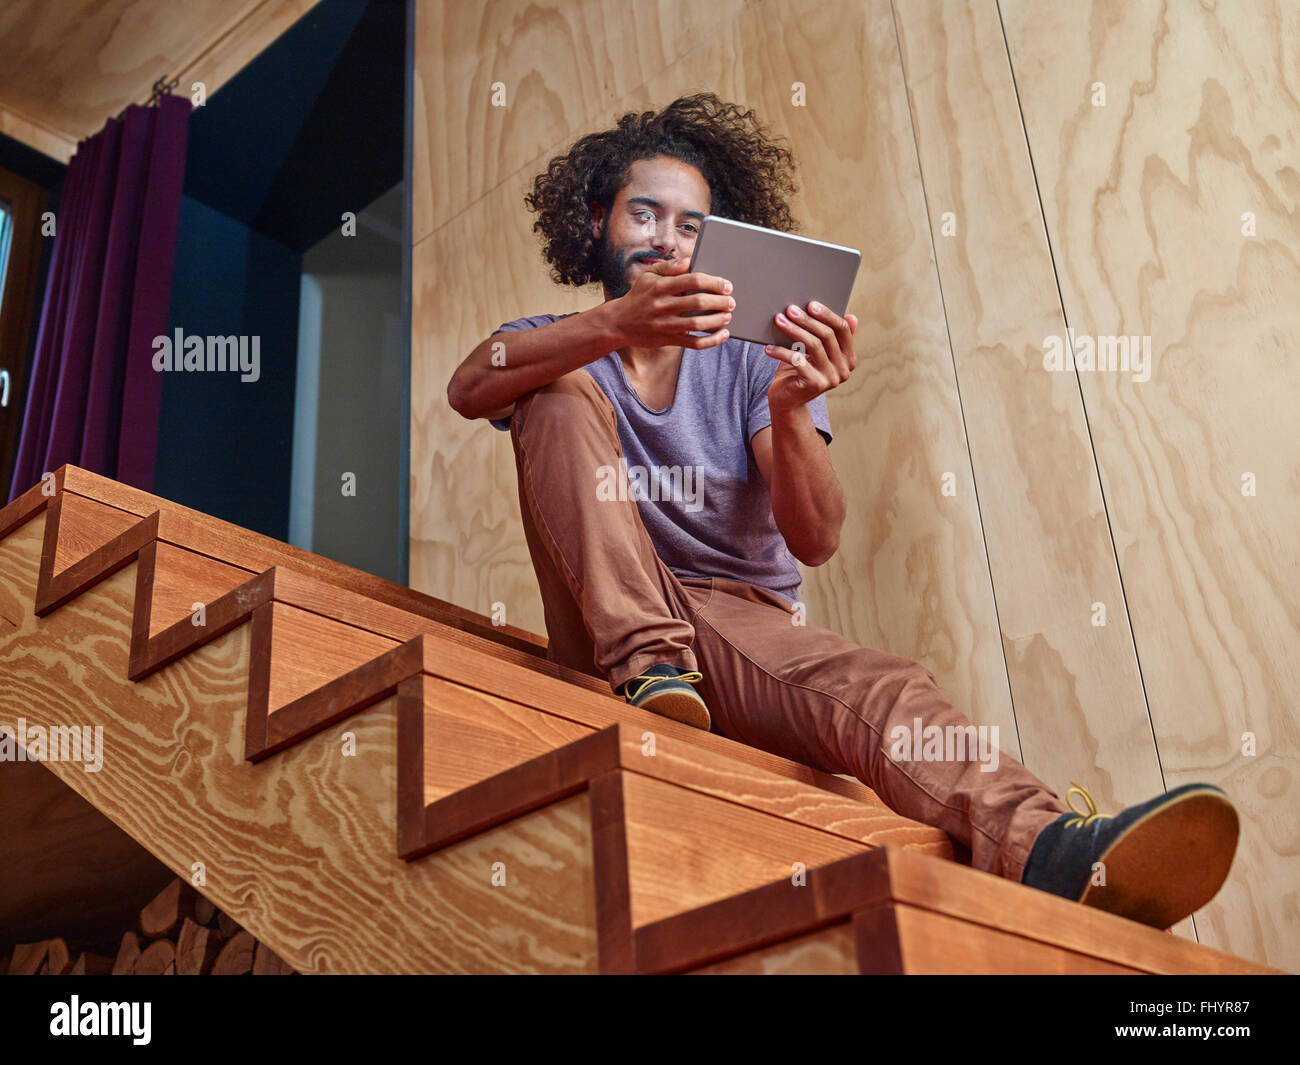 Young man on wooden stairs looking at digital tablet Stock Photo